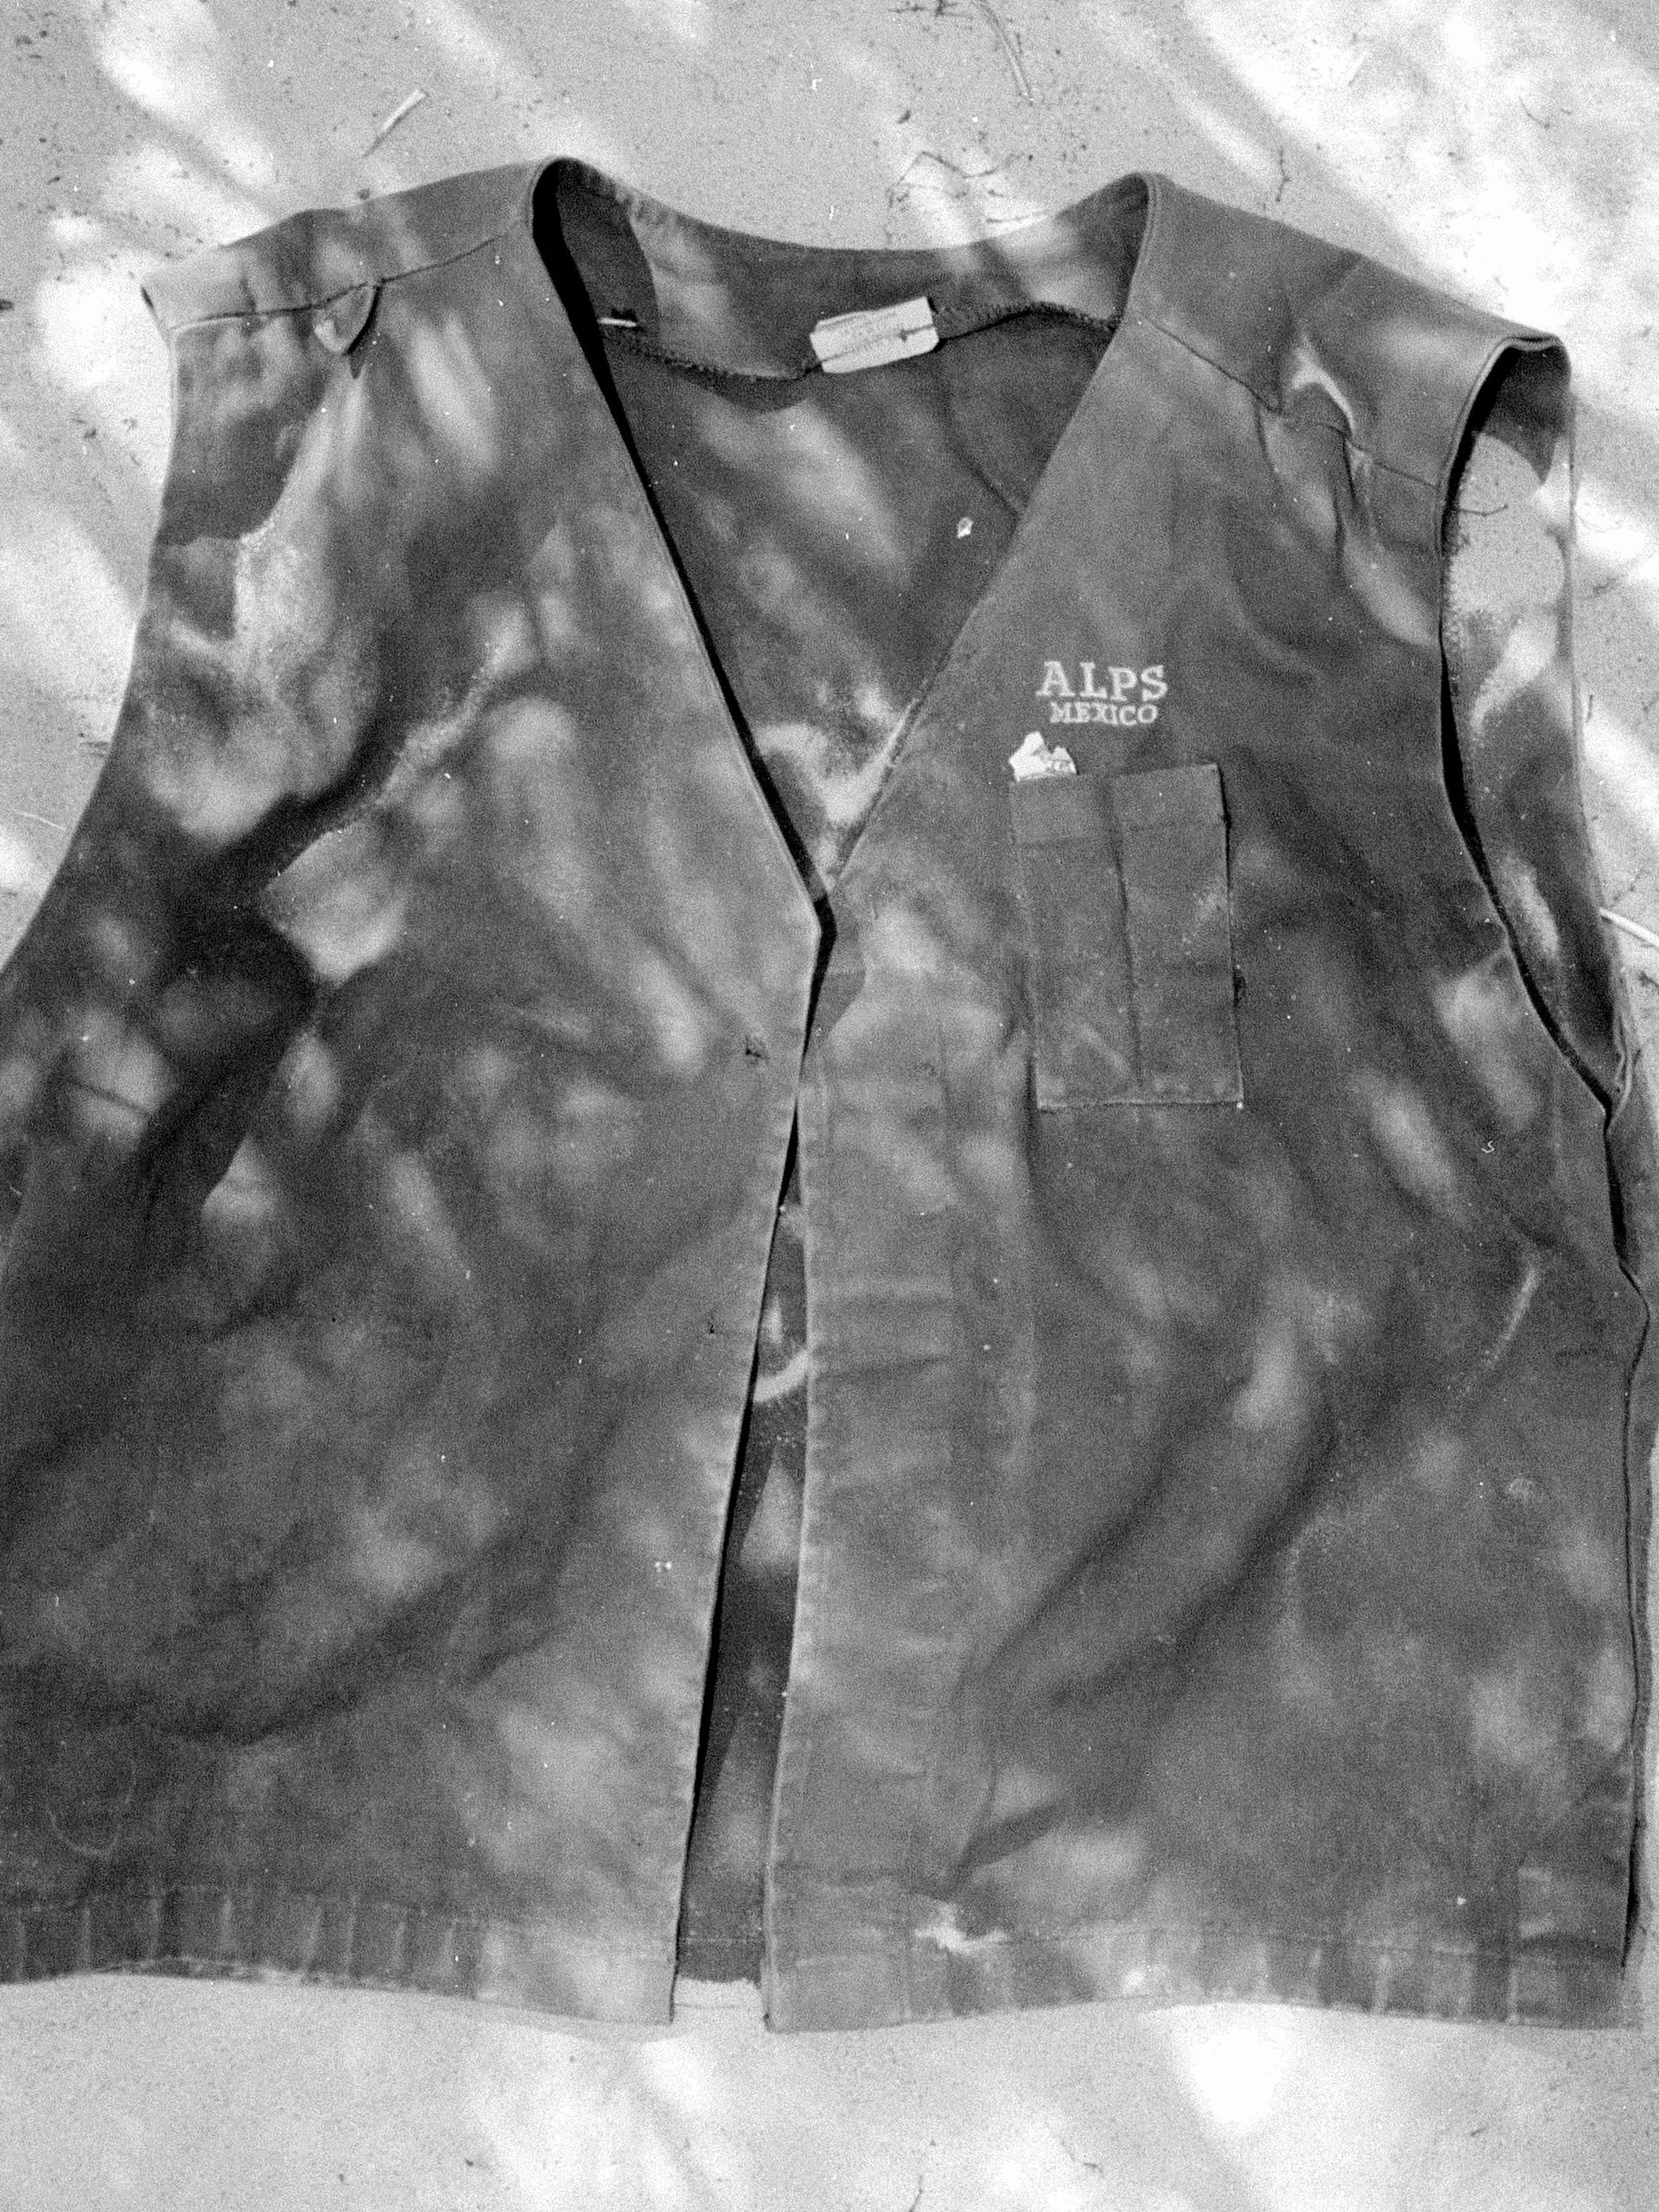 A vest found with the body of a Latino man in the open desert west of Winterhaven, CA, on August 6, 2000. Photo from John Doe Case #00-127.